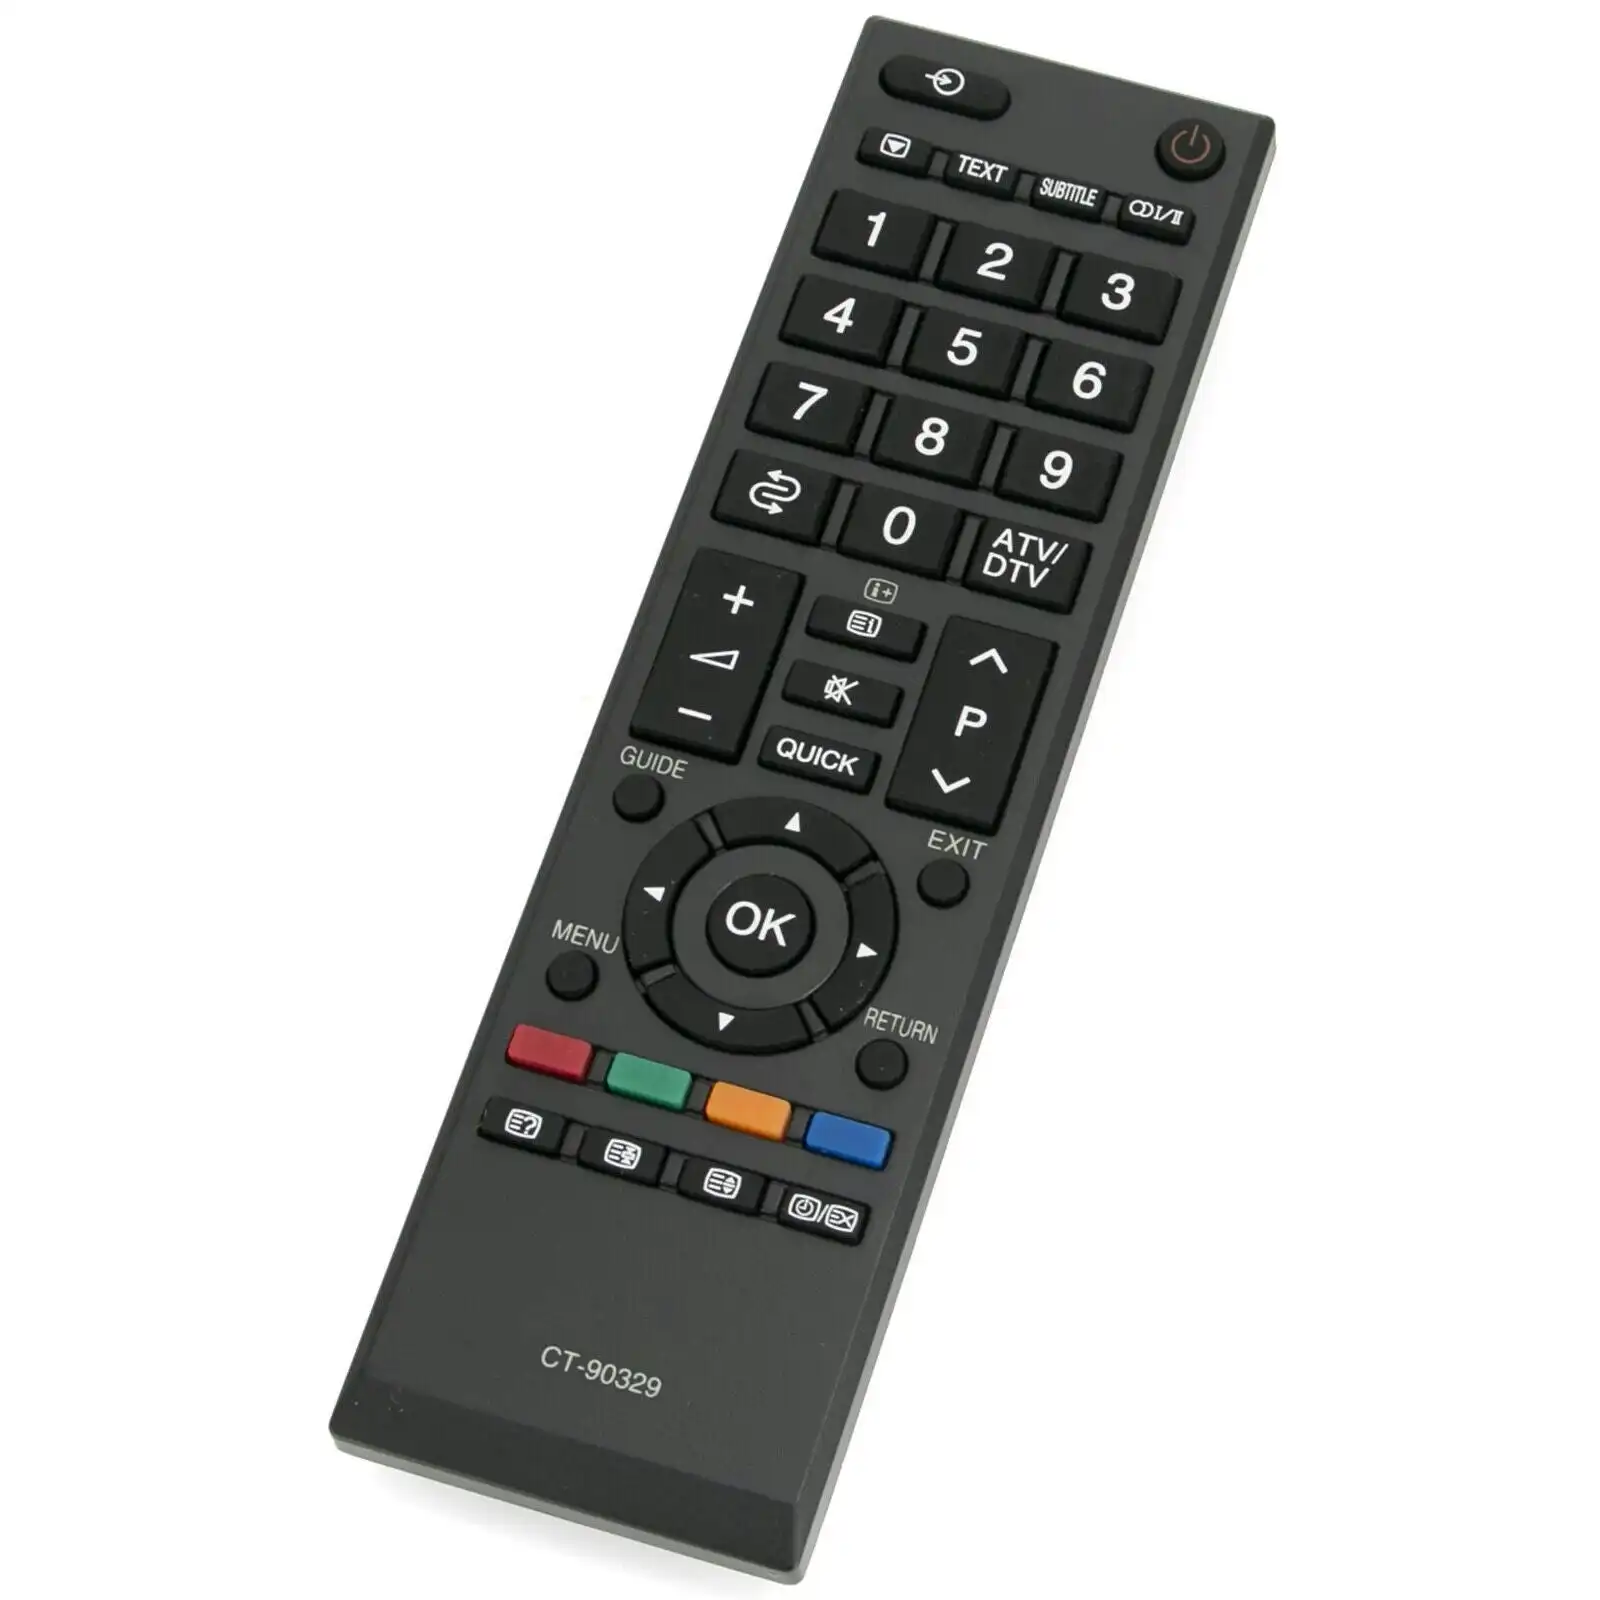 Remote CT-90329 Remote Control fit for Toshiba digital LCD TV